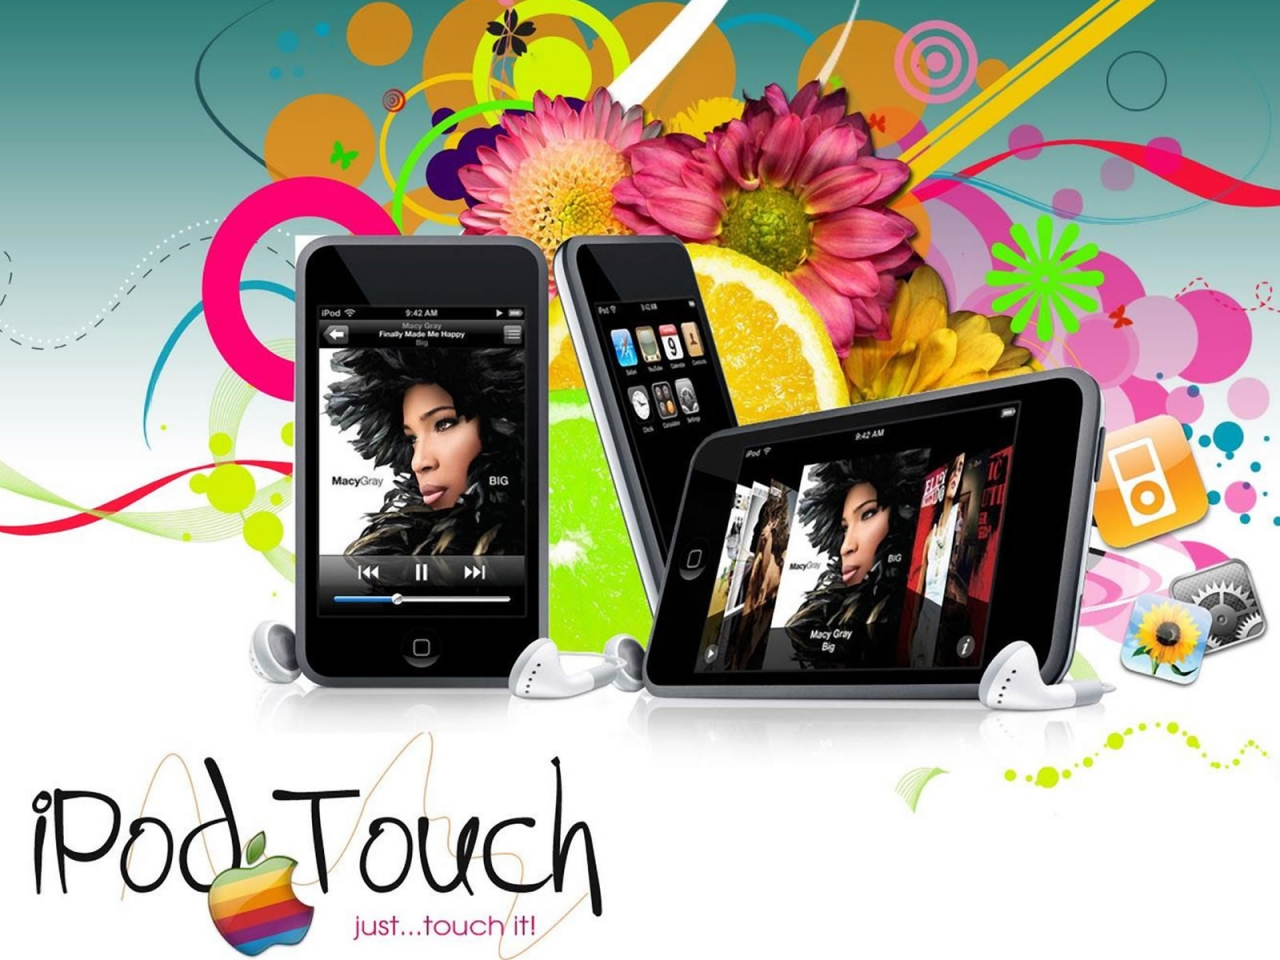 iPod Touch for 1280 x 960 resolution